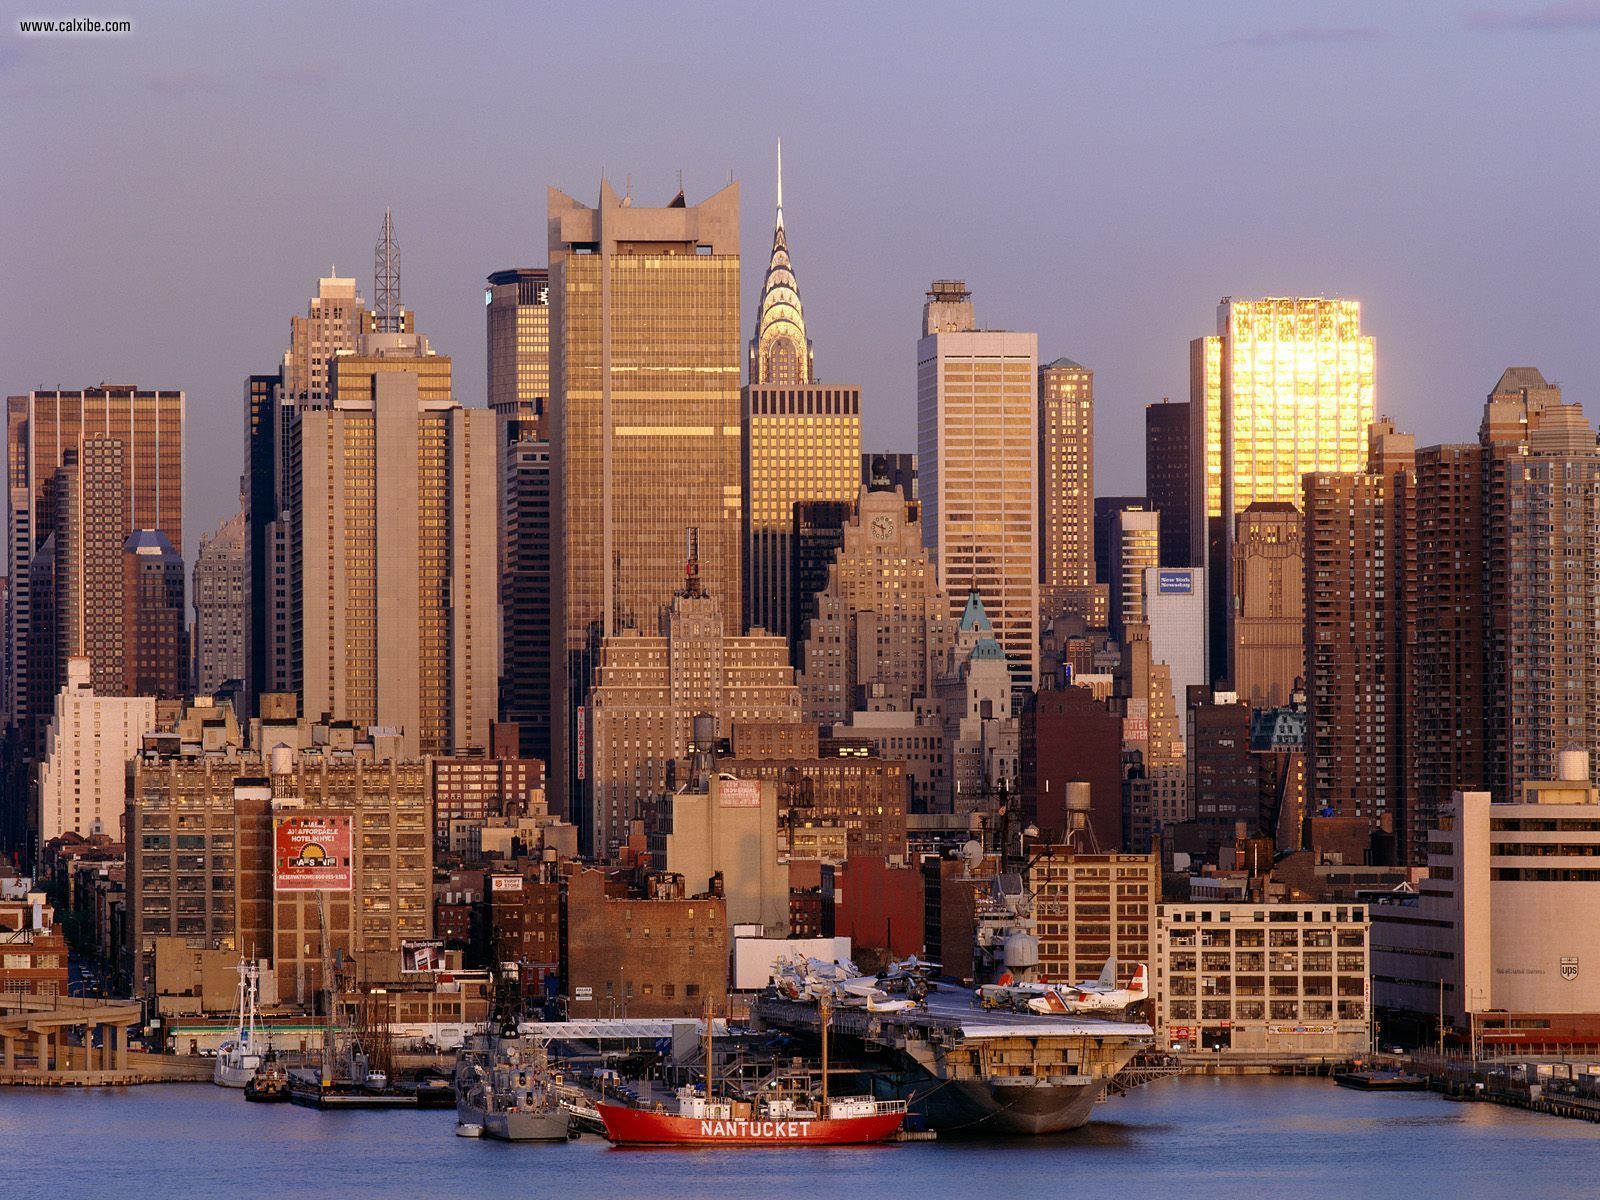 Buildings & City: Harbor View Of The Big Apple New York, picture nr. 20585